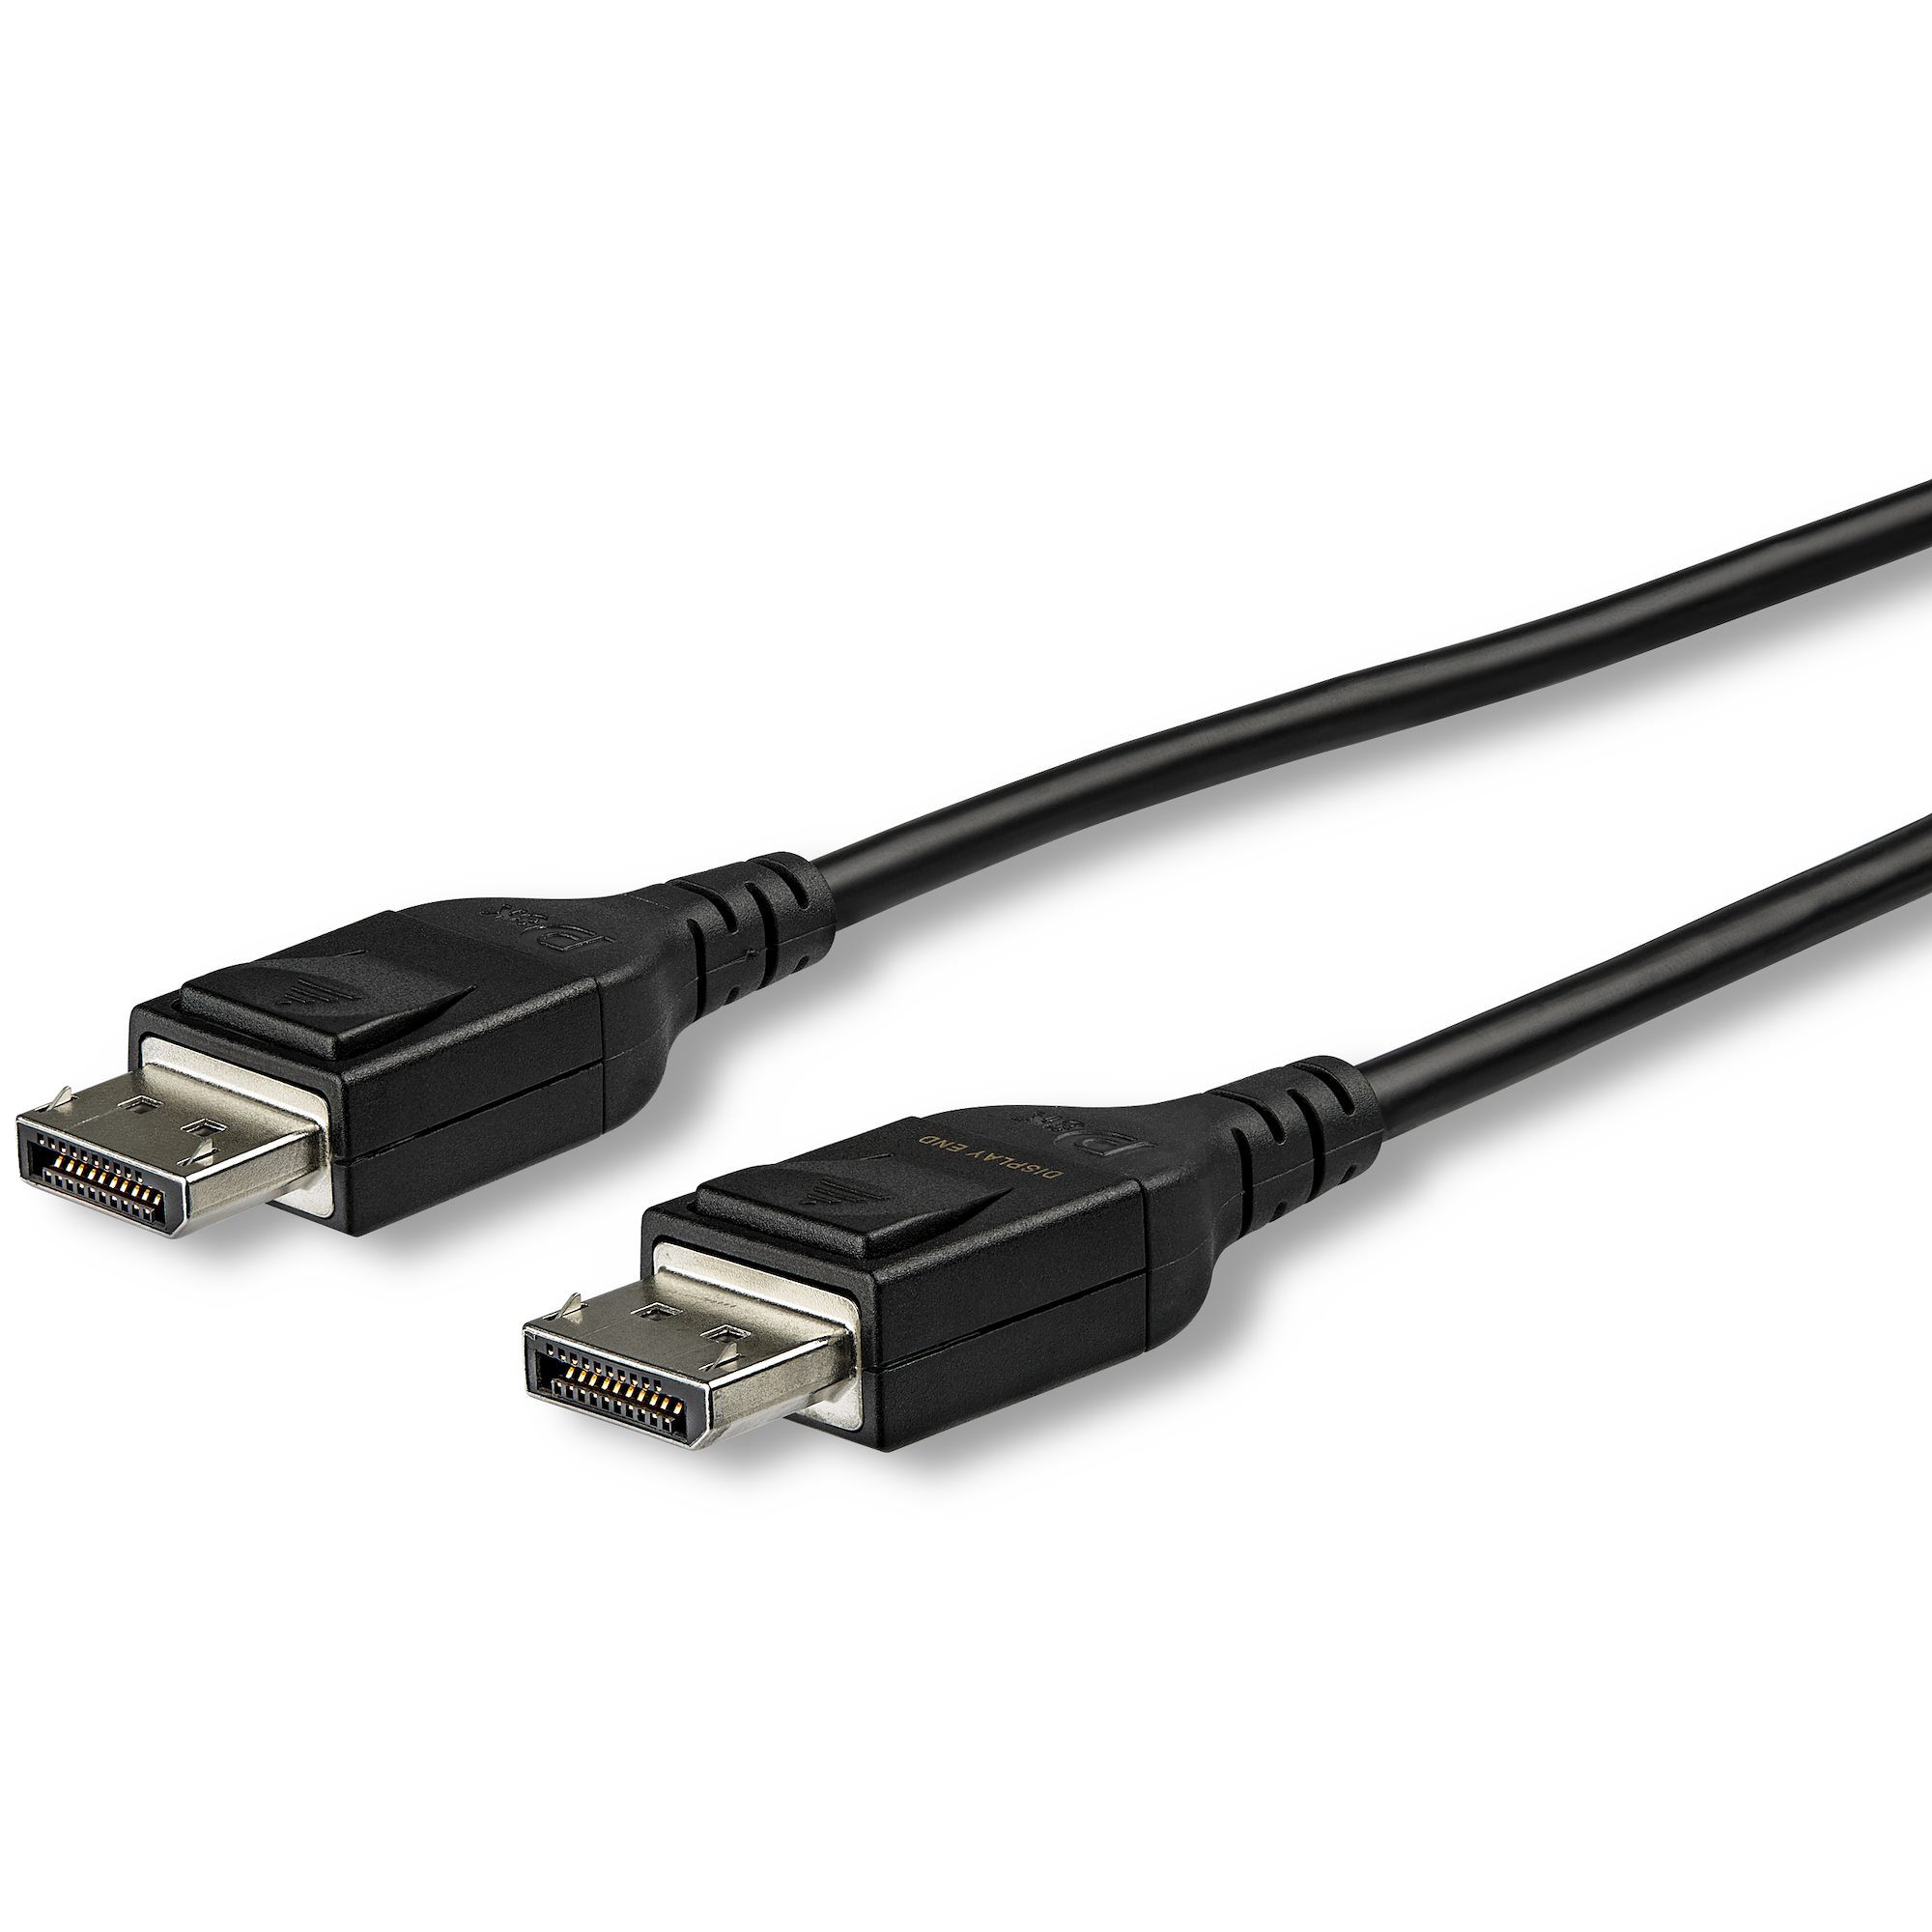 15m DisplayPort 1.4 Active Optical Cable - DisplayPort Cables & Adapter  Cables, Cables